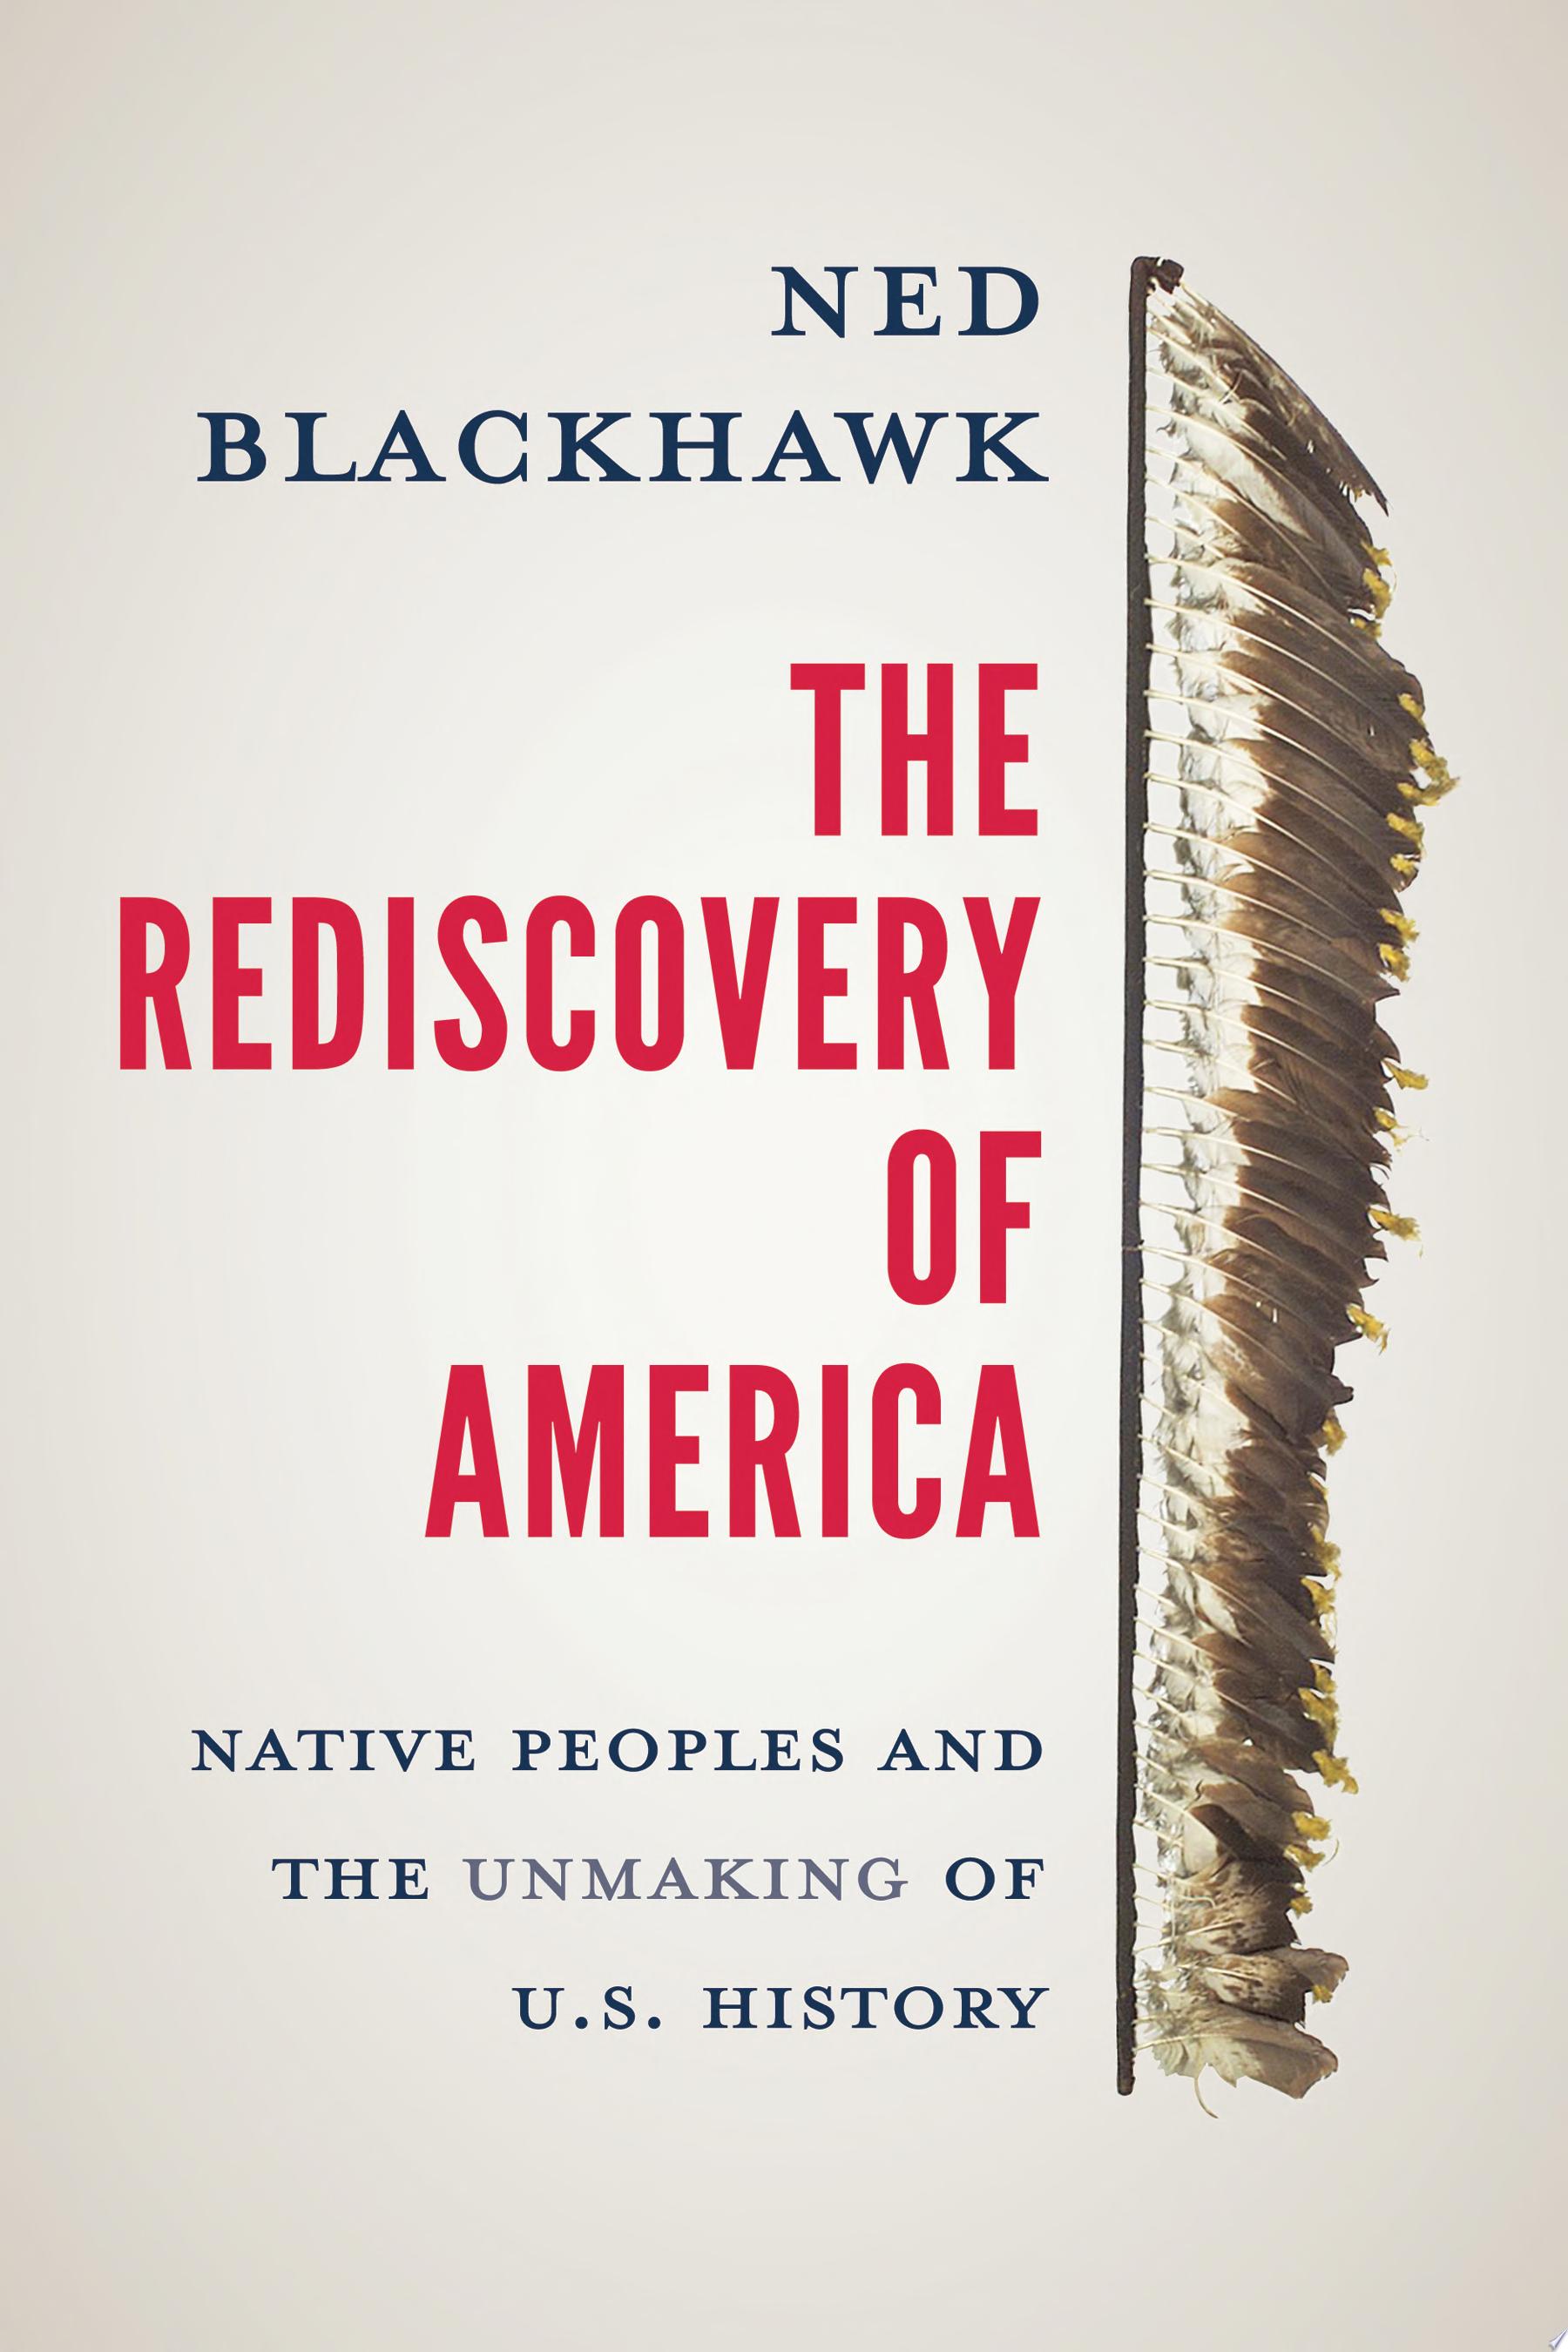 Image for "The Rediscovery of America"